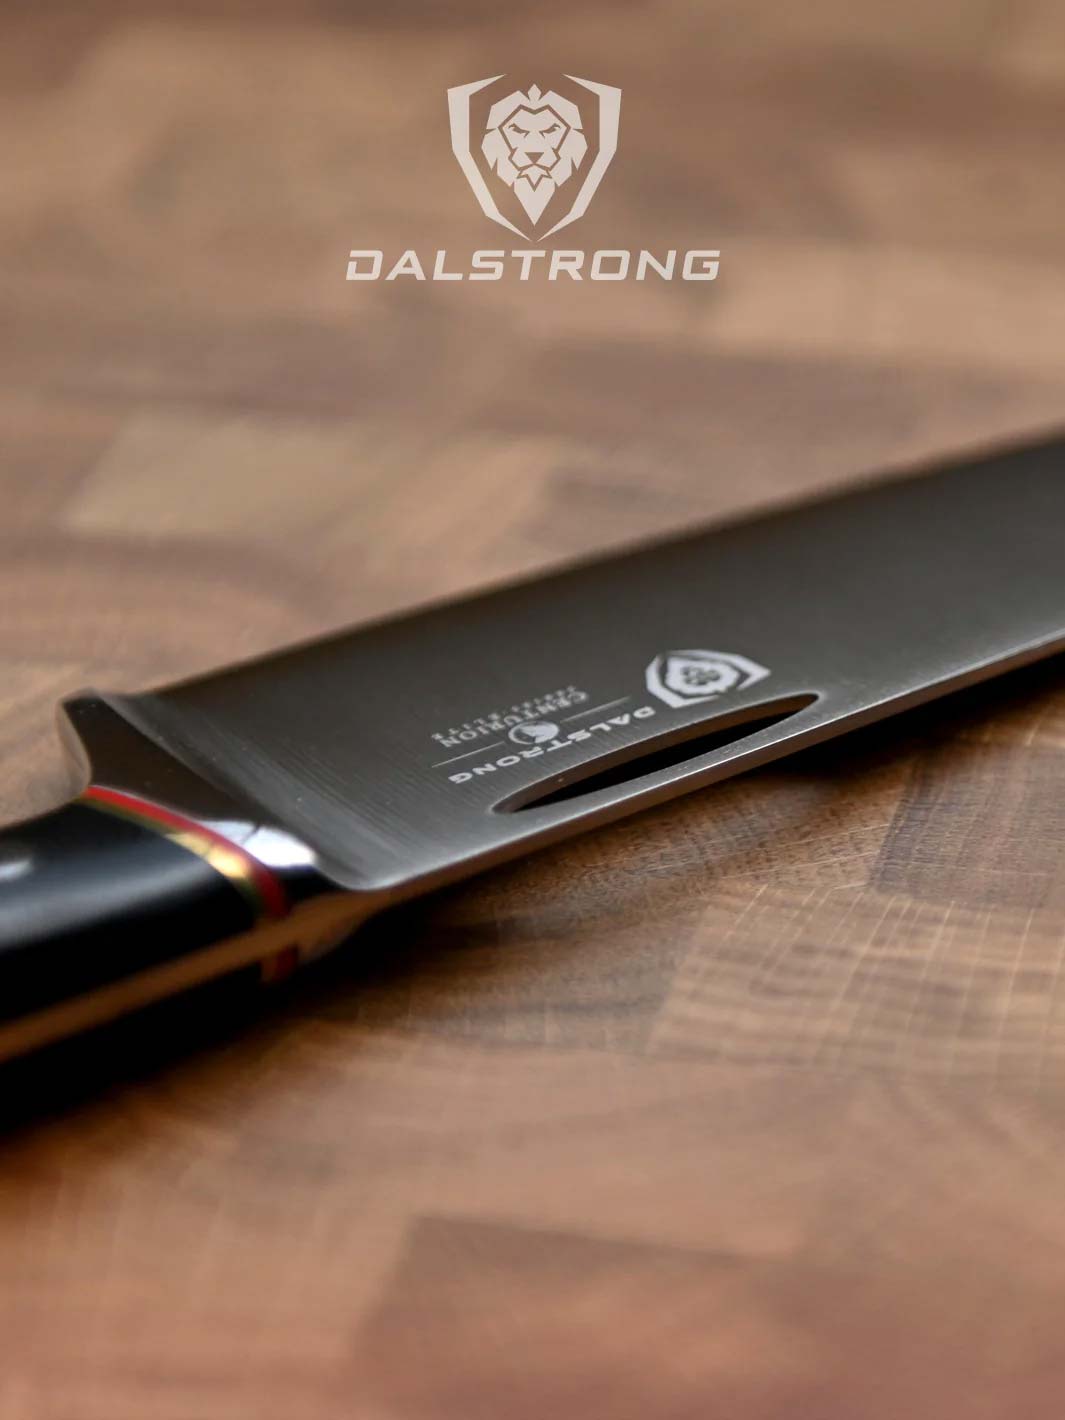 Dalstrong centurion series 8 inch chef knife showcasing it's blade.